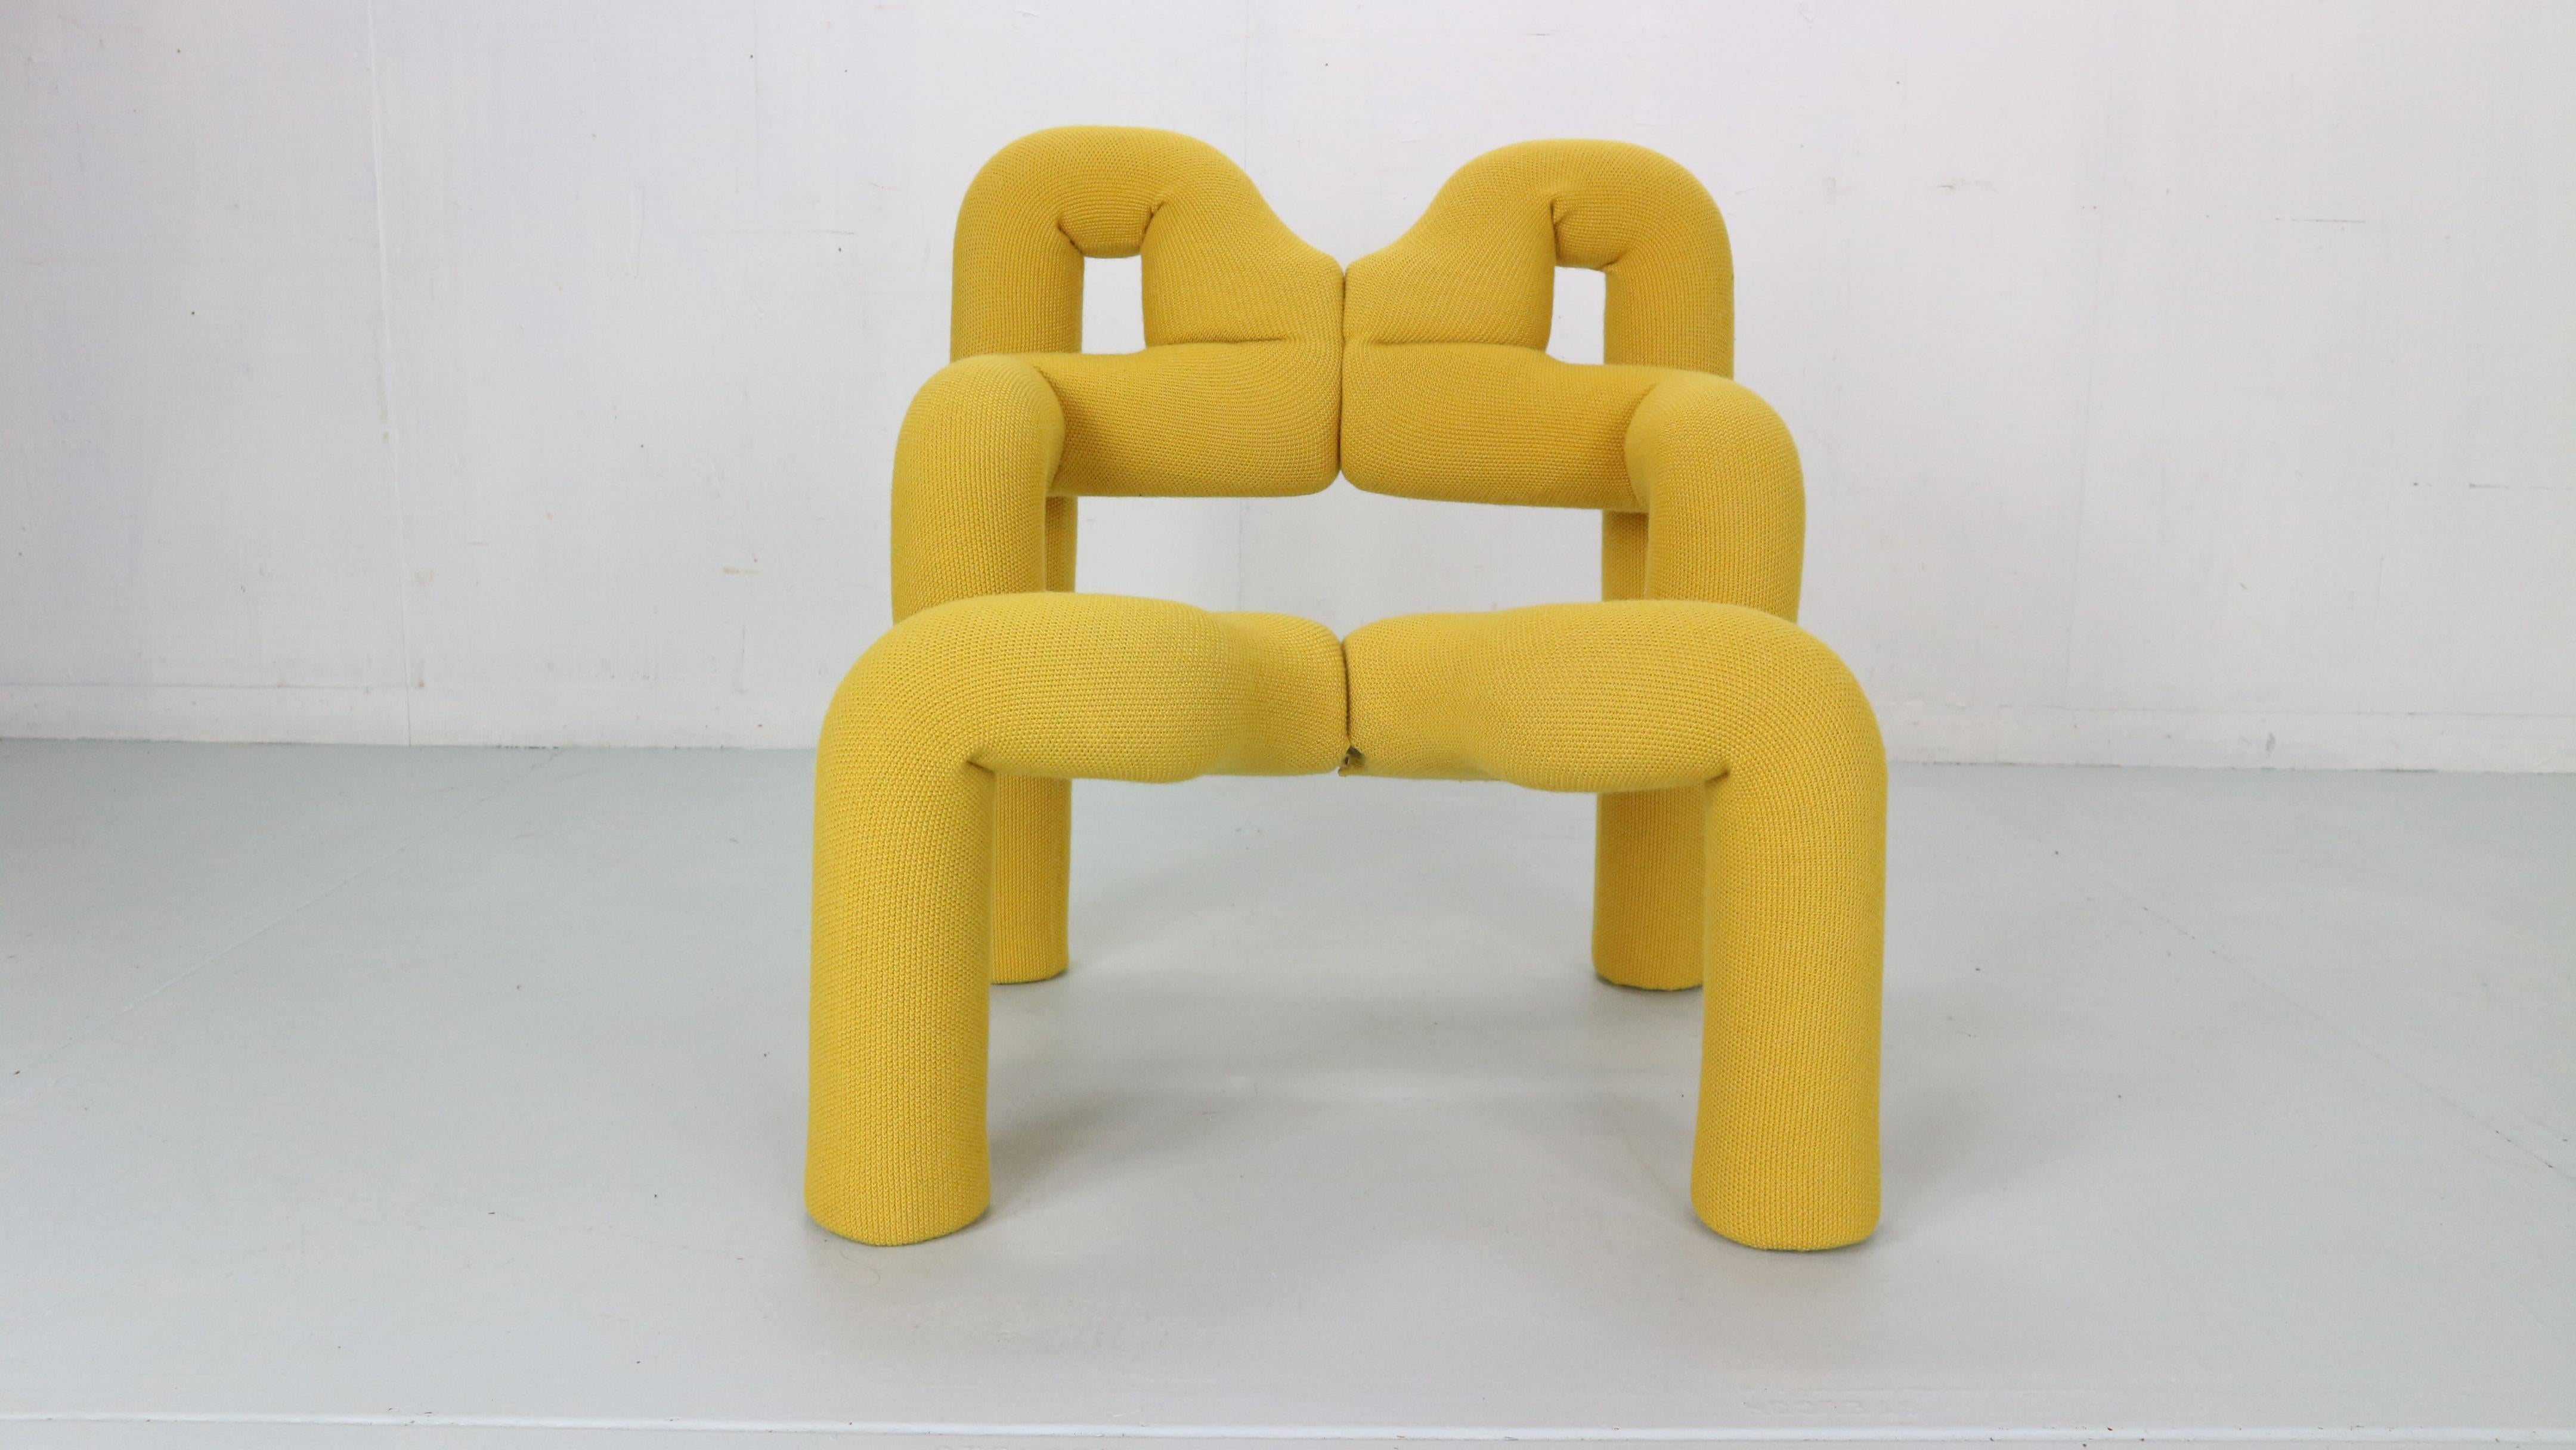 Iconic armchair- lounge chair designed by Terje Ekström and manufactured by Stokke in 1970's period, Norway.
The chairs are both modern and yet very functional. 
The design dates from the late 1970s. The colour is mustard yellow and it has been